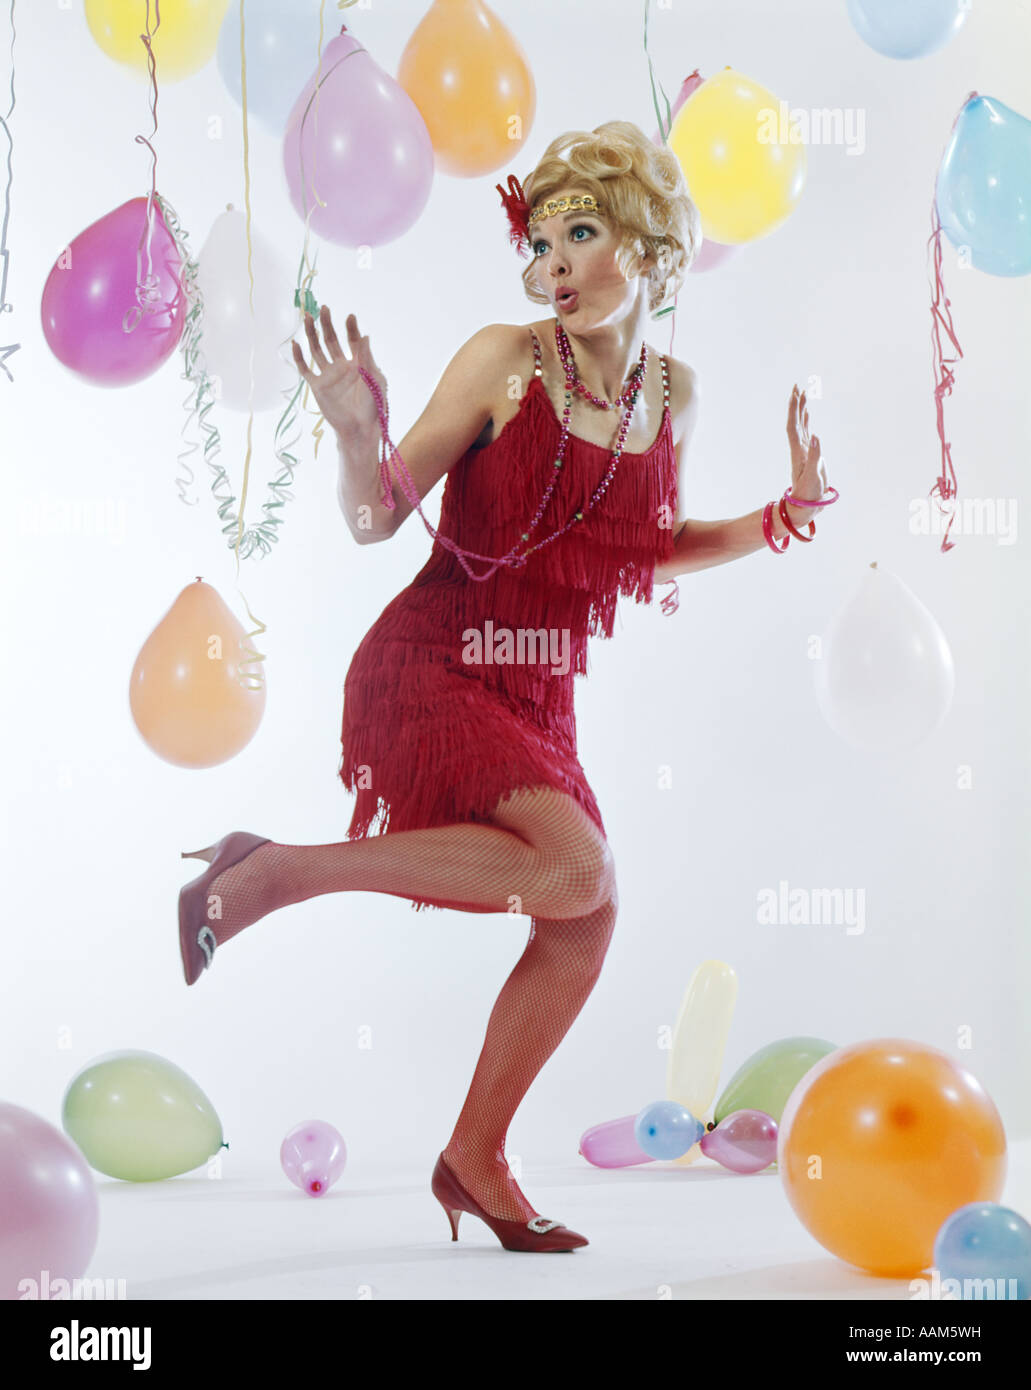 1970s WOMAN RED FRINGE 1920s FLAPPER DRESS DANCING CHARLESTON AMONG PARTY BALLOONS STREAMERS Stock Photo